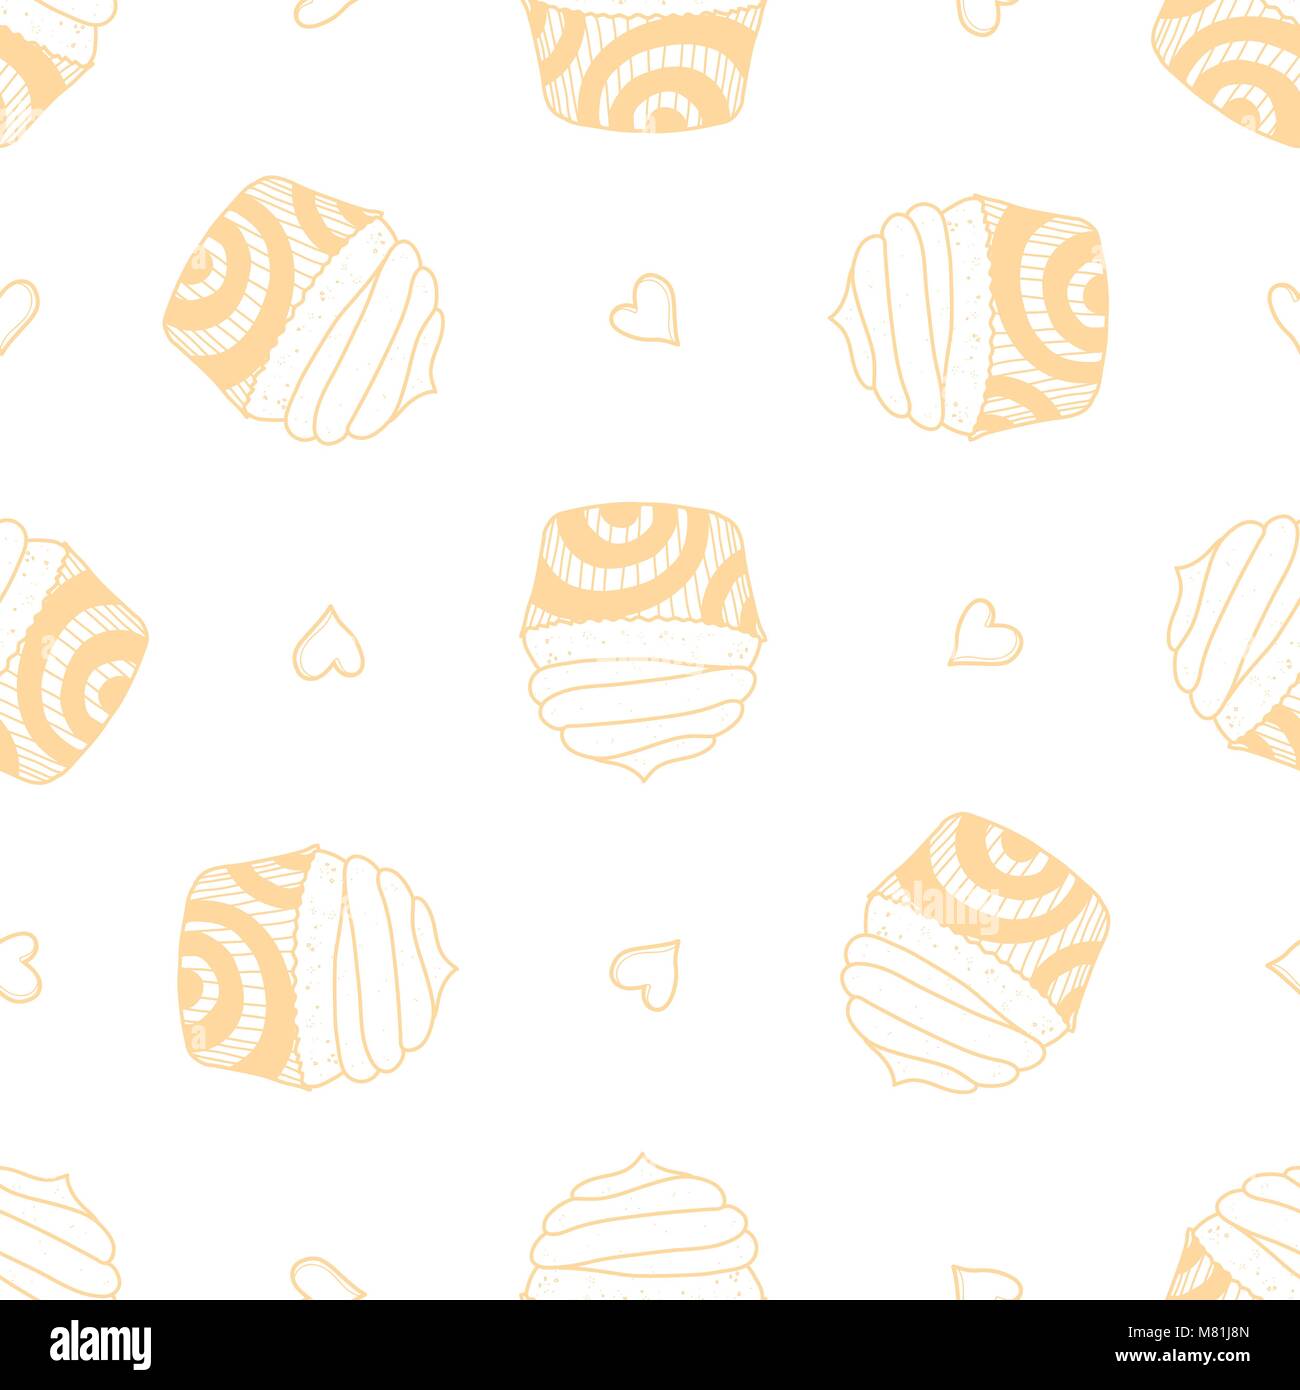 Cupcakes and hearts random on white background. Cute hand drawn seamless pattern of dessert in pastel pink outline style. Stock Vector